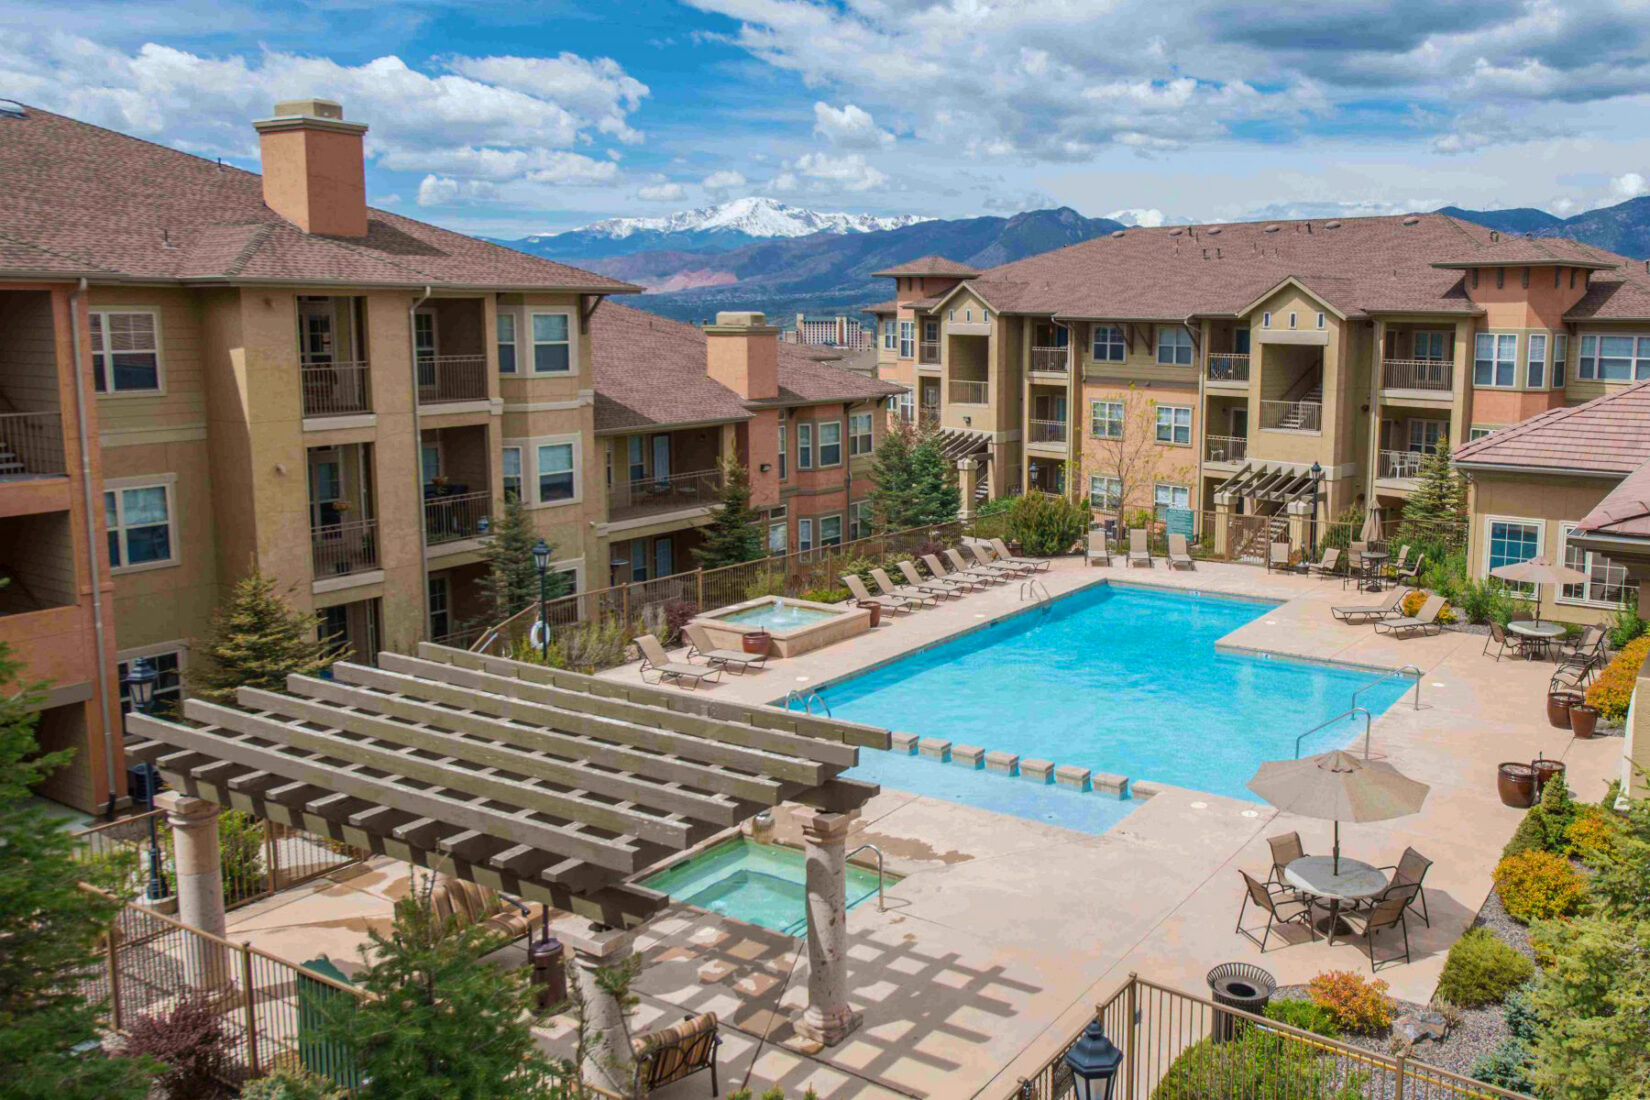 Outdoor Apartment Pool Area with Mountains in the Background